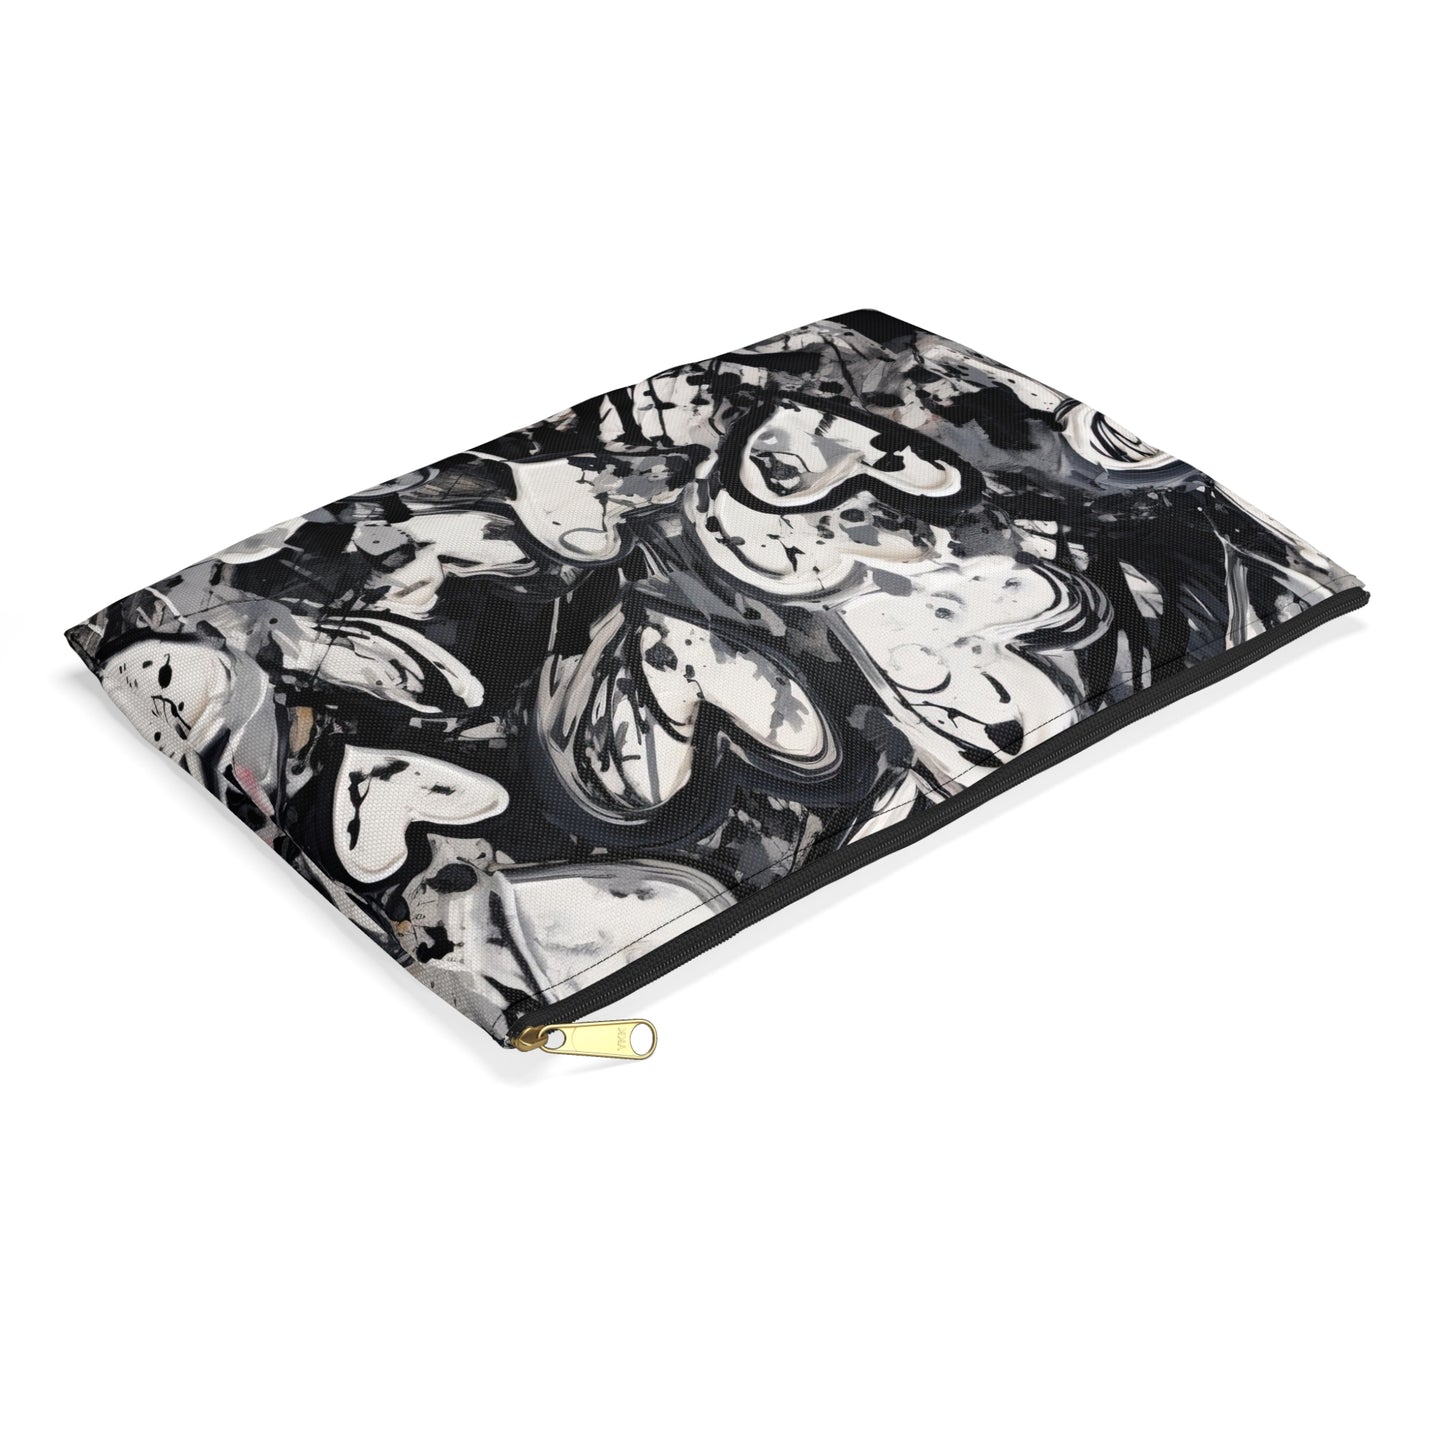 Black and White Painted Hearts -  Accessory Pouch / Makeup Case / Travel Pouch / Pencil Case / Art Case